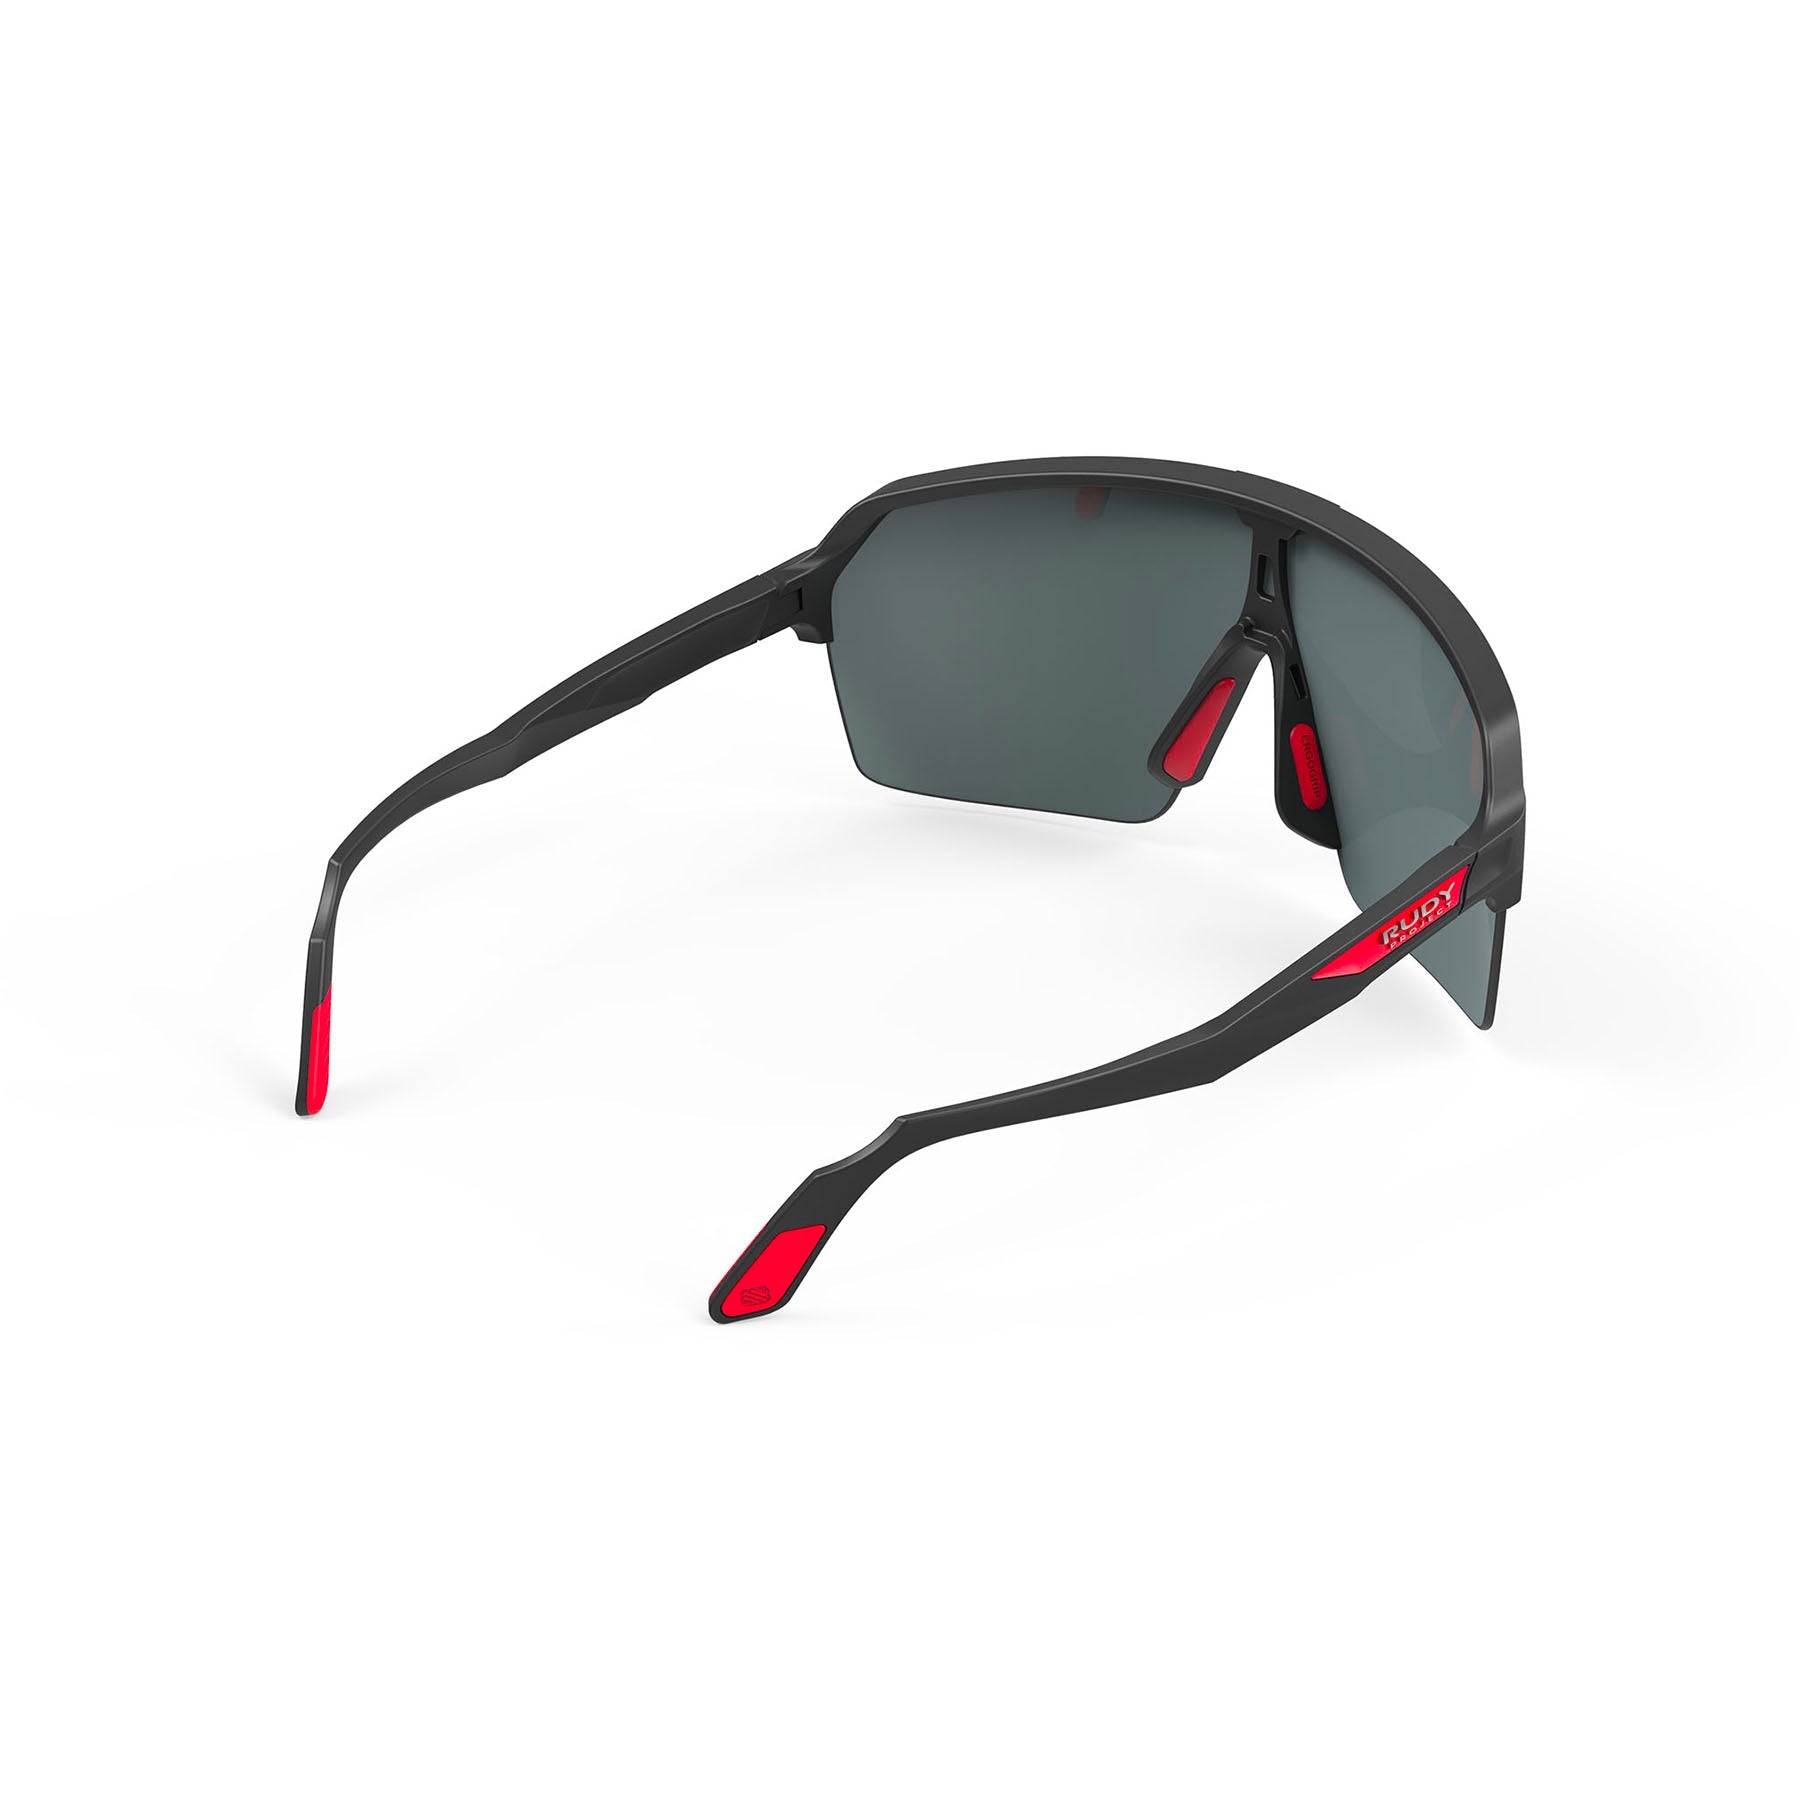 Rudy Project Spinshield Air running and cycling sport shield sunglasses#color_spinshield-air-black-matte-with-multilaser-red-lenses